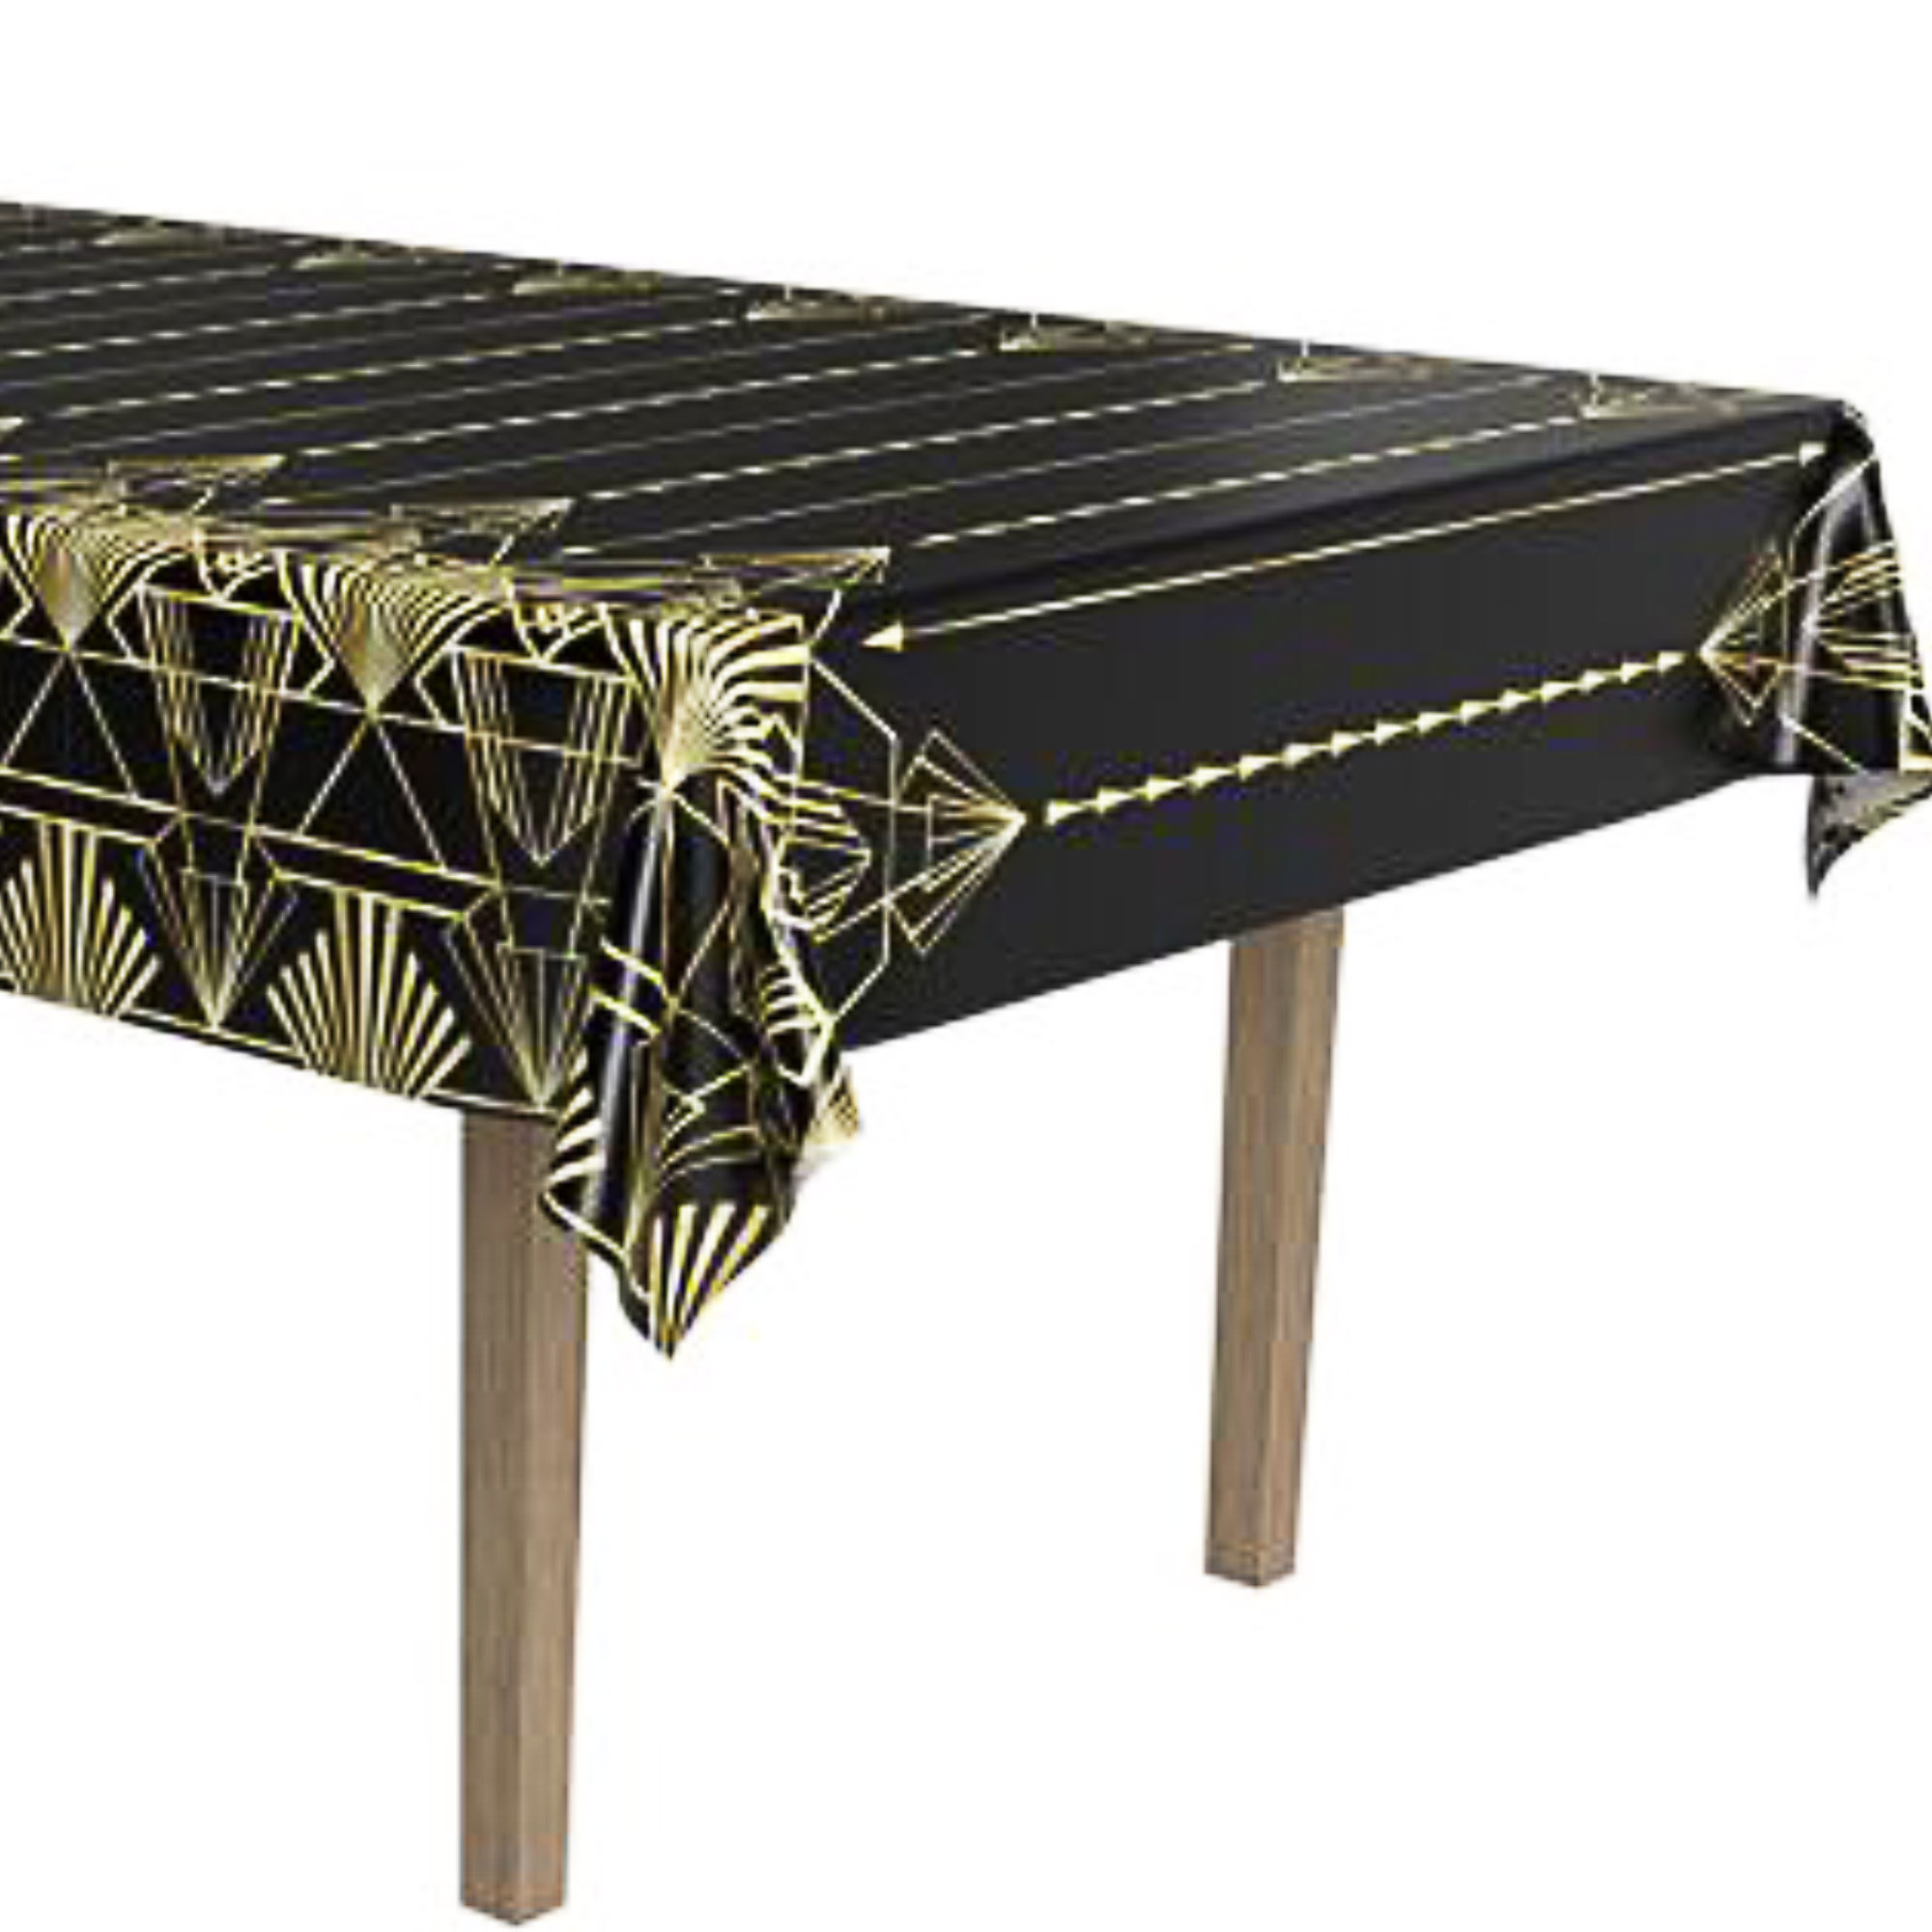 Roaring 20's Table Cover